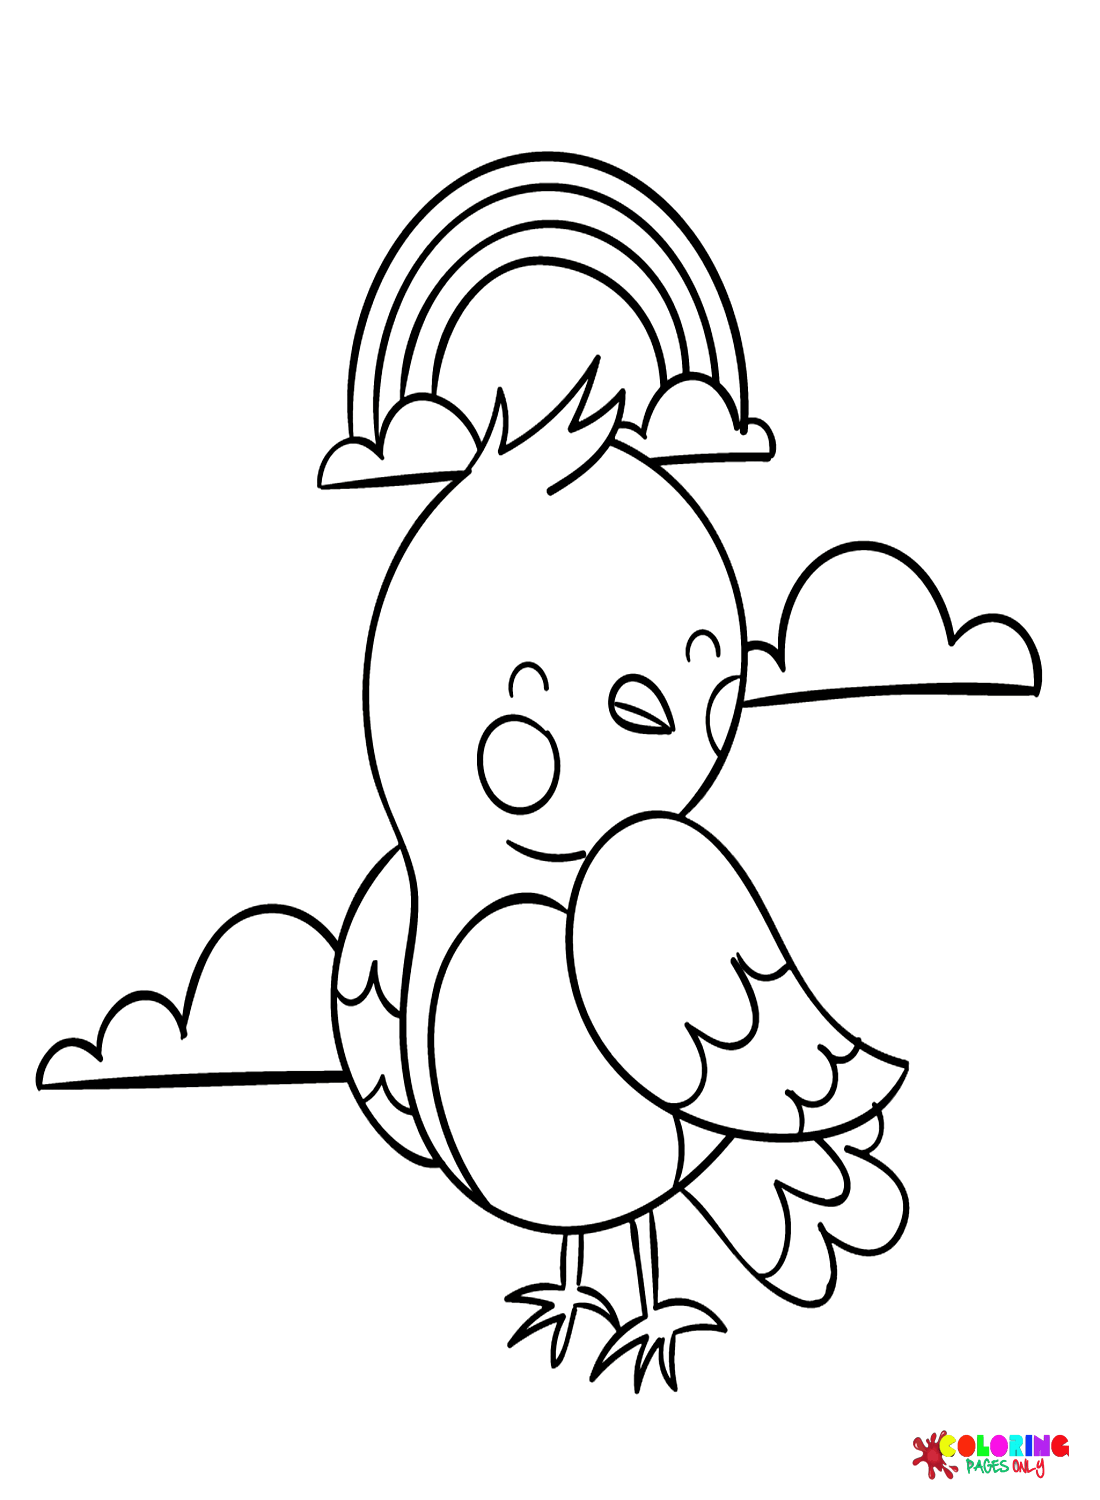 Cute Cuckoo for Kids Coloring Page